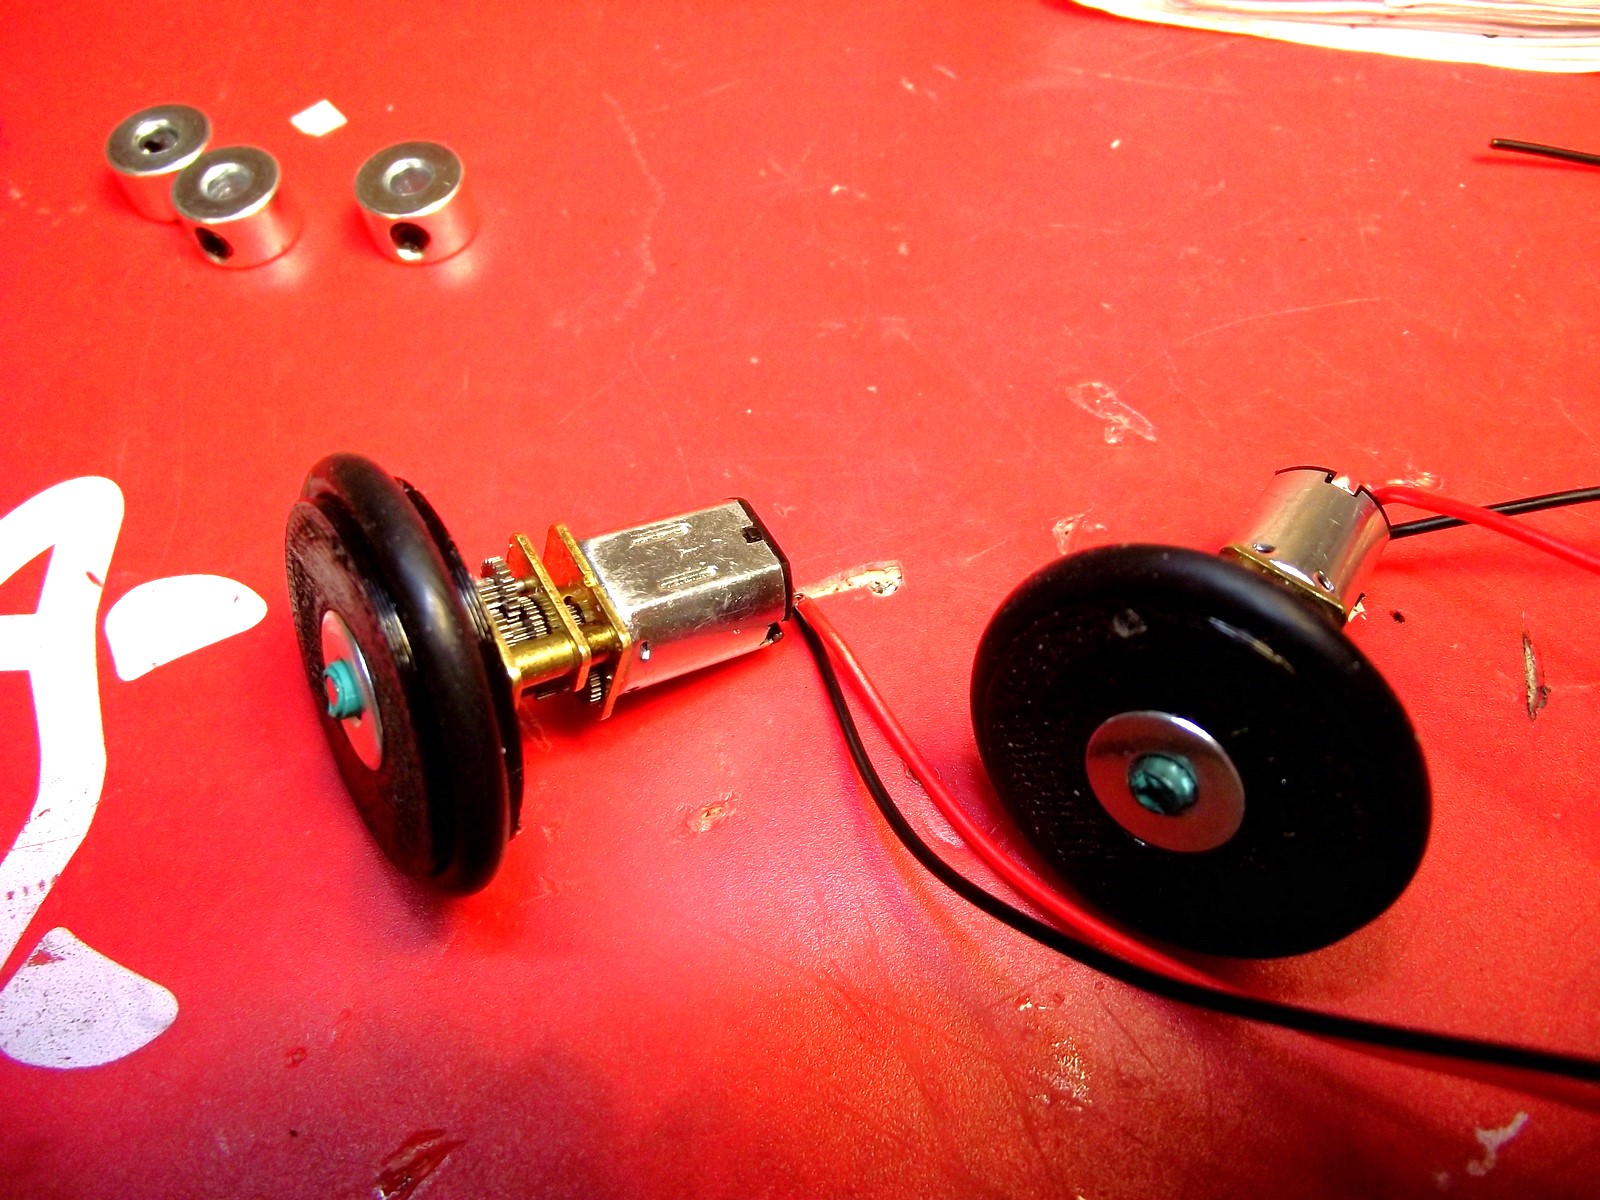 motors attached to axle clamps press fitted into the 3D printed pulley